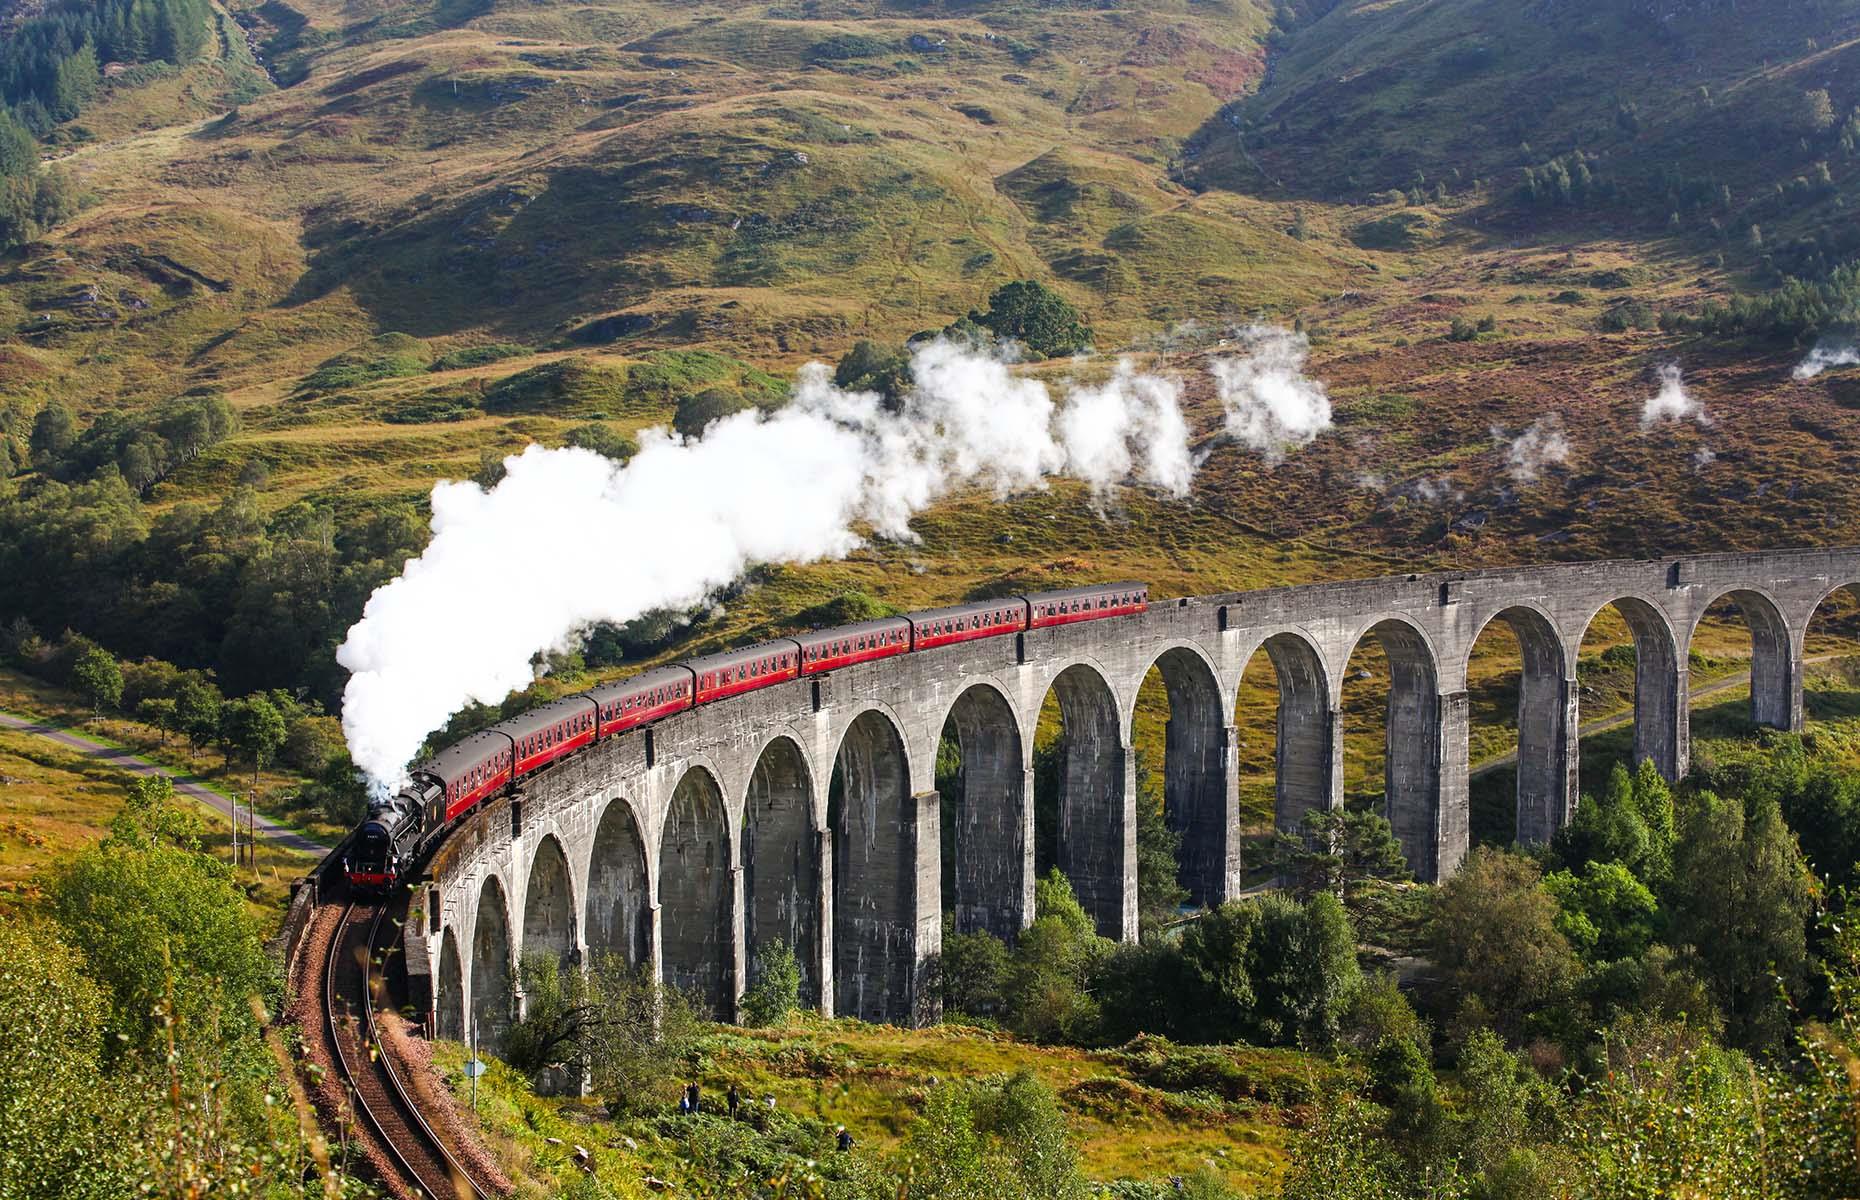 <p>Dubbed Britain's most scenic train route, the <a href="https://www.scotrail.co.uk/scotland-by-rail/great-scenic-rail-journeys/west-highland-line-glasgow-oban-and-fort-williammallaig">West Highland Line</a> runs from the Scottish city of Glasgow to Fort William before continuing its journey towards the port of Mallaig. After a brief stop in Fort William, the train crosses the Glenfinnan Viaduct – the same bridge the Hogwarts Express crosses in the Harry Potter movies. What's more, the <a href="https://westcoastrailways.co.uk/jacobite/steam-train-trip">Jacobite Steam Train</a> was used as the Hogwarts Express in the movies and is available to ride during the summer months (roughly April to October).</p>  <p><a href="https://www.loveexploring.com/galleries/86683/the-worlds-most-scenic-train-journeys-that-dont-cost-a-fortune?page=1"><strong>Discover beautiful train journeys that don't cost a fortune</strong></a></p>